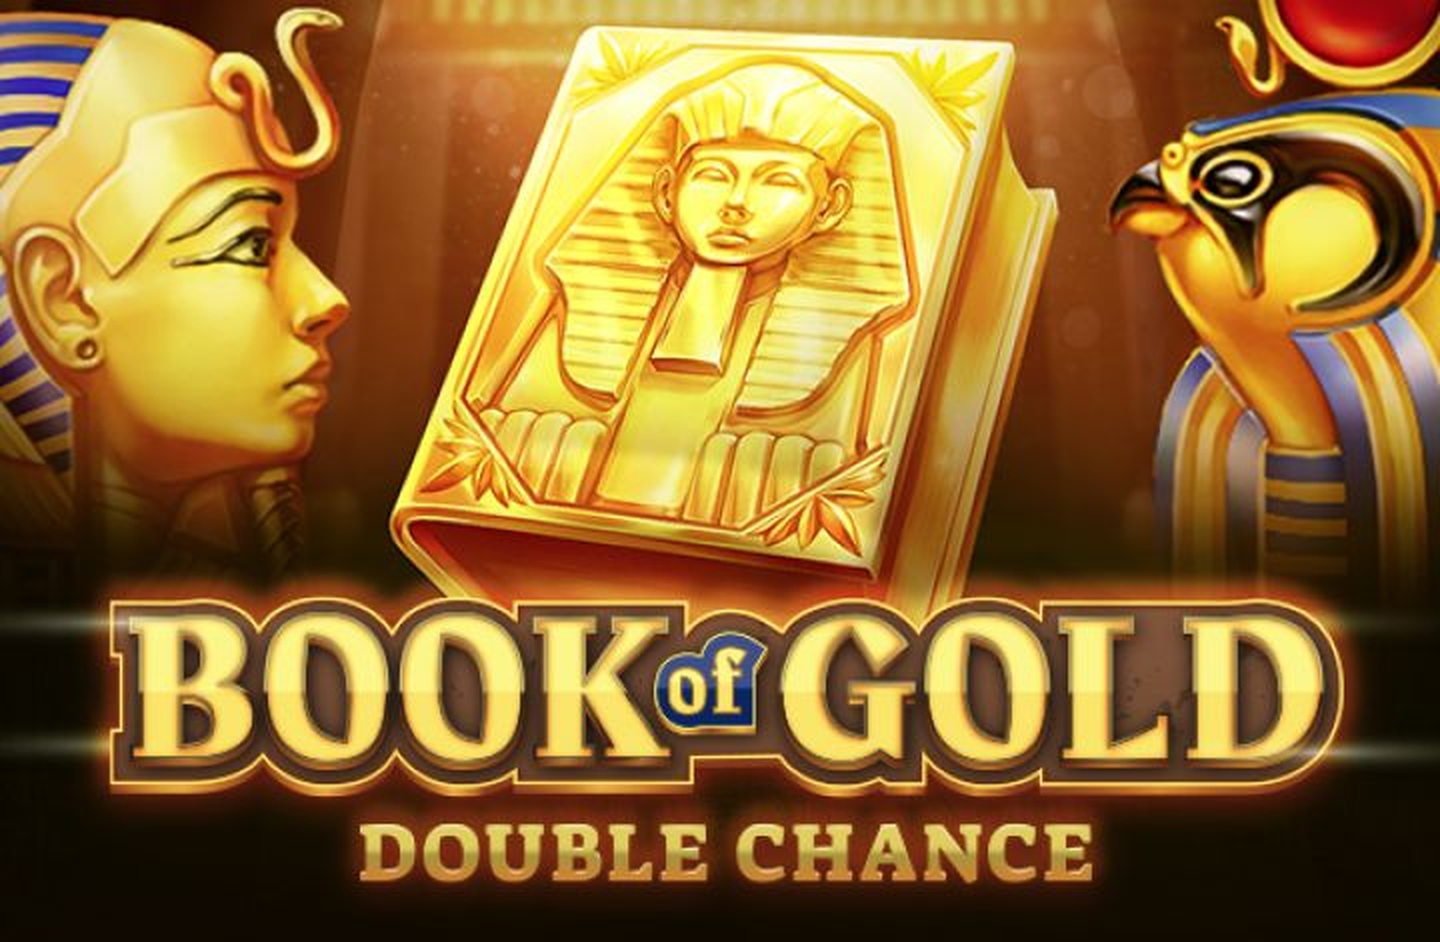 Book of Gold: Double Chance demo